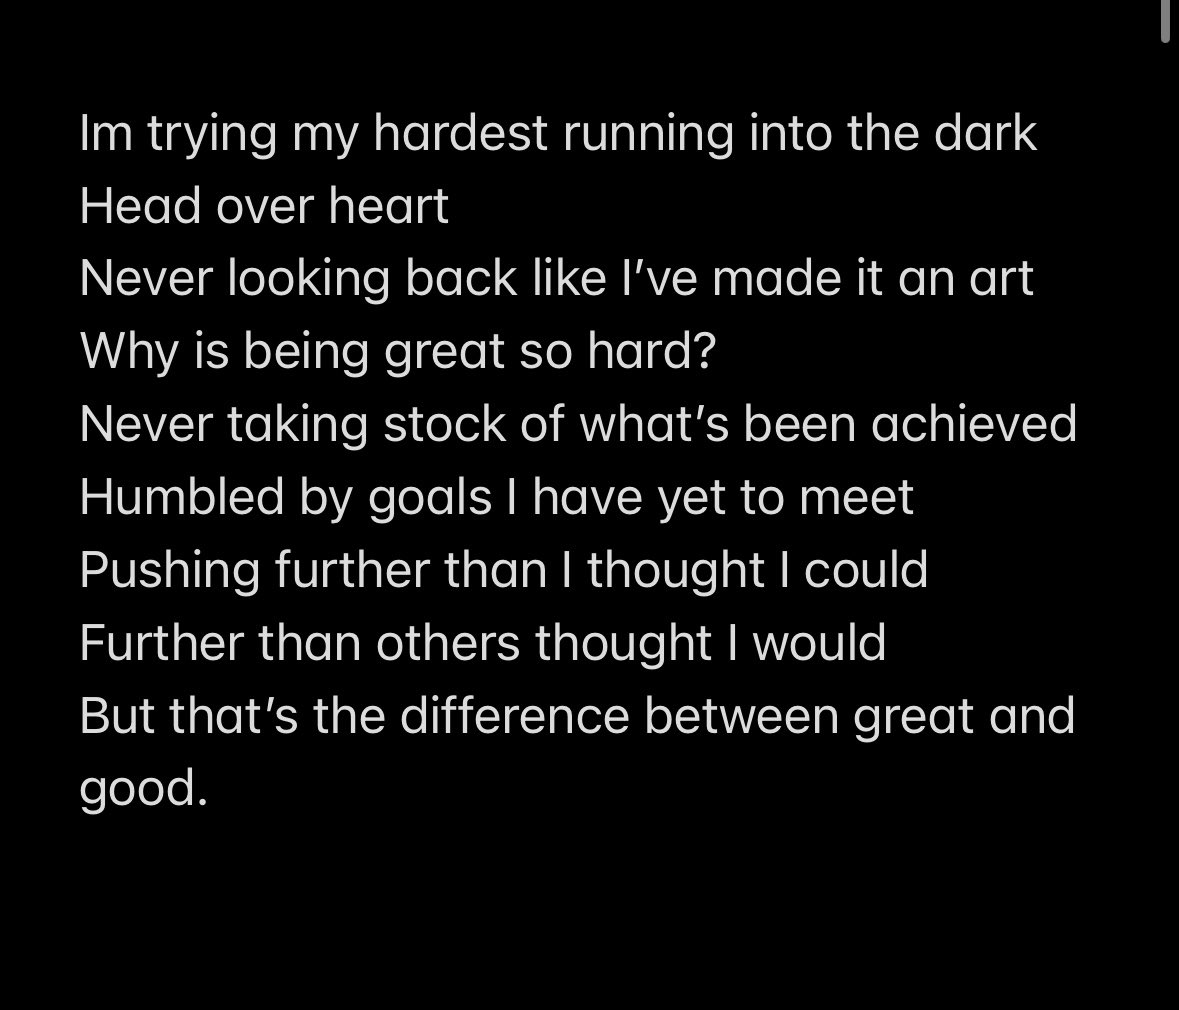 Wrote a poem about striving for greatness. If anyone wants me to write for one of those Royal Navy ads let me know. #madeinstoke